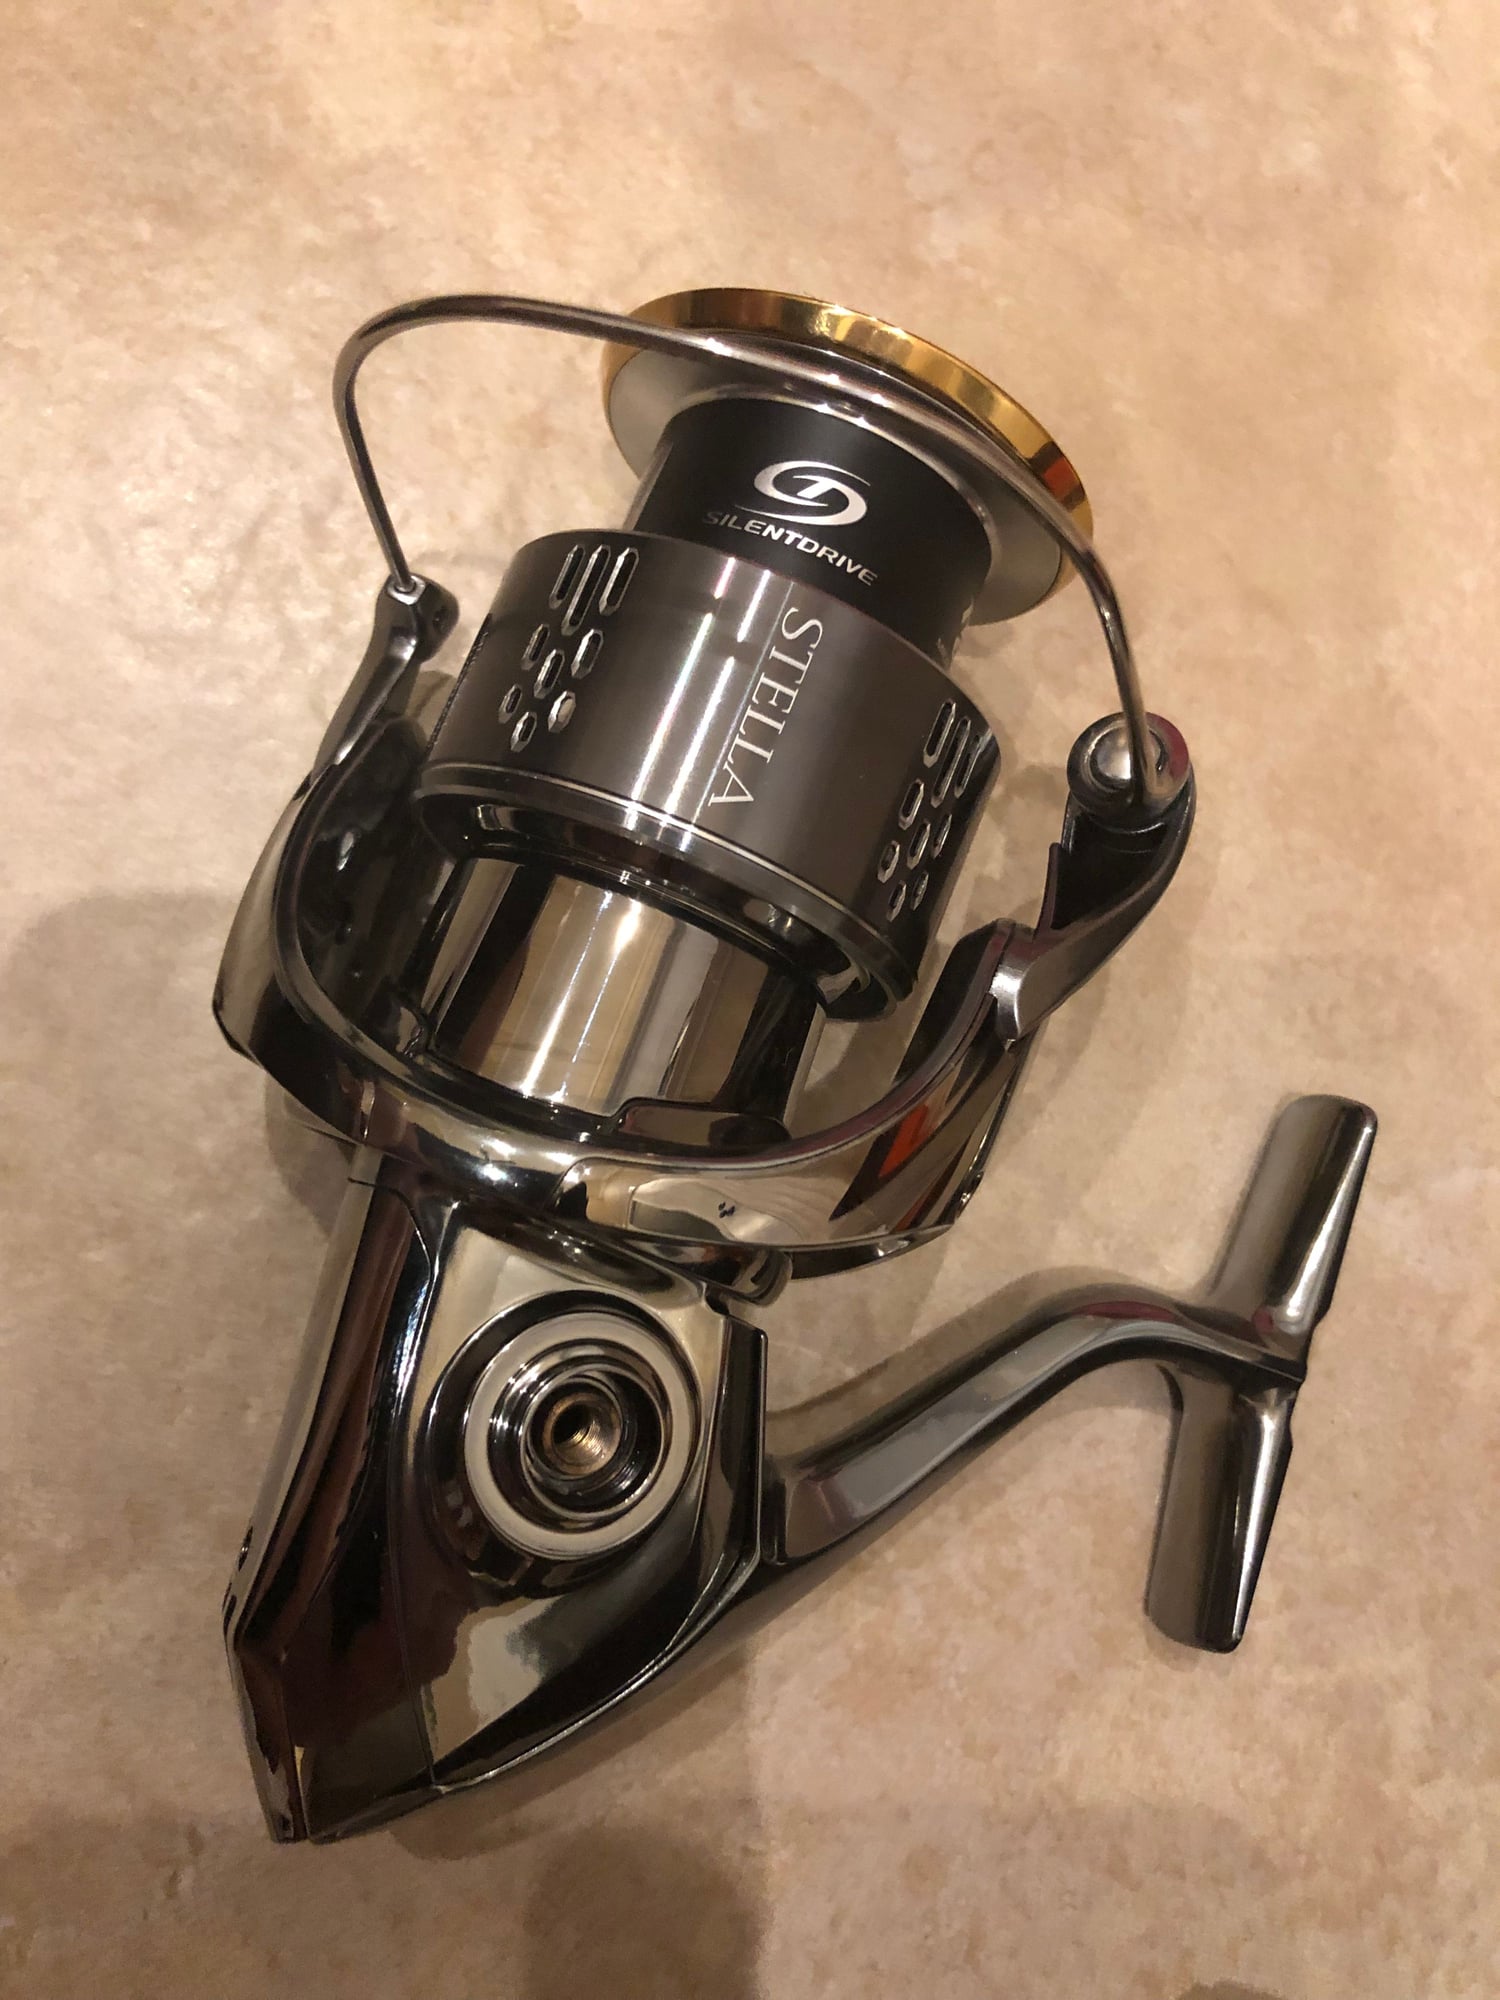 2019 Shimano Stella for sale - The Hull Truth - Boating and